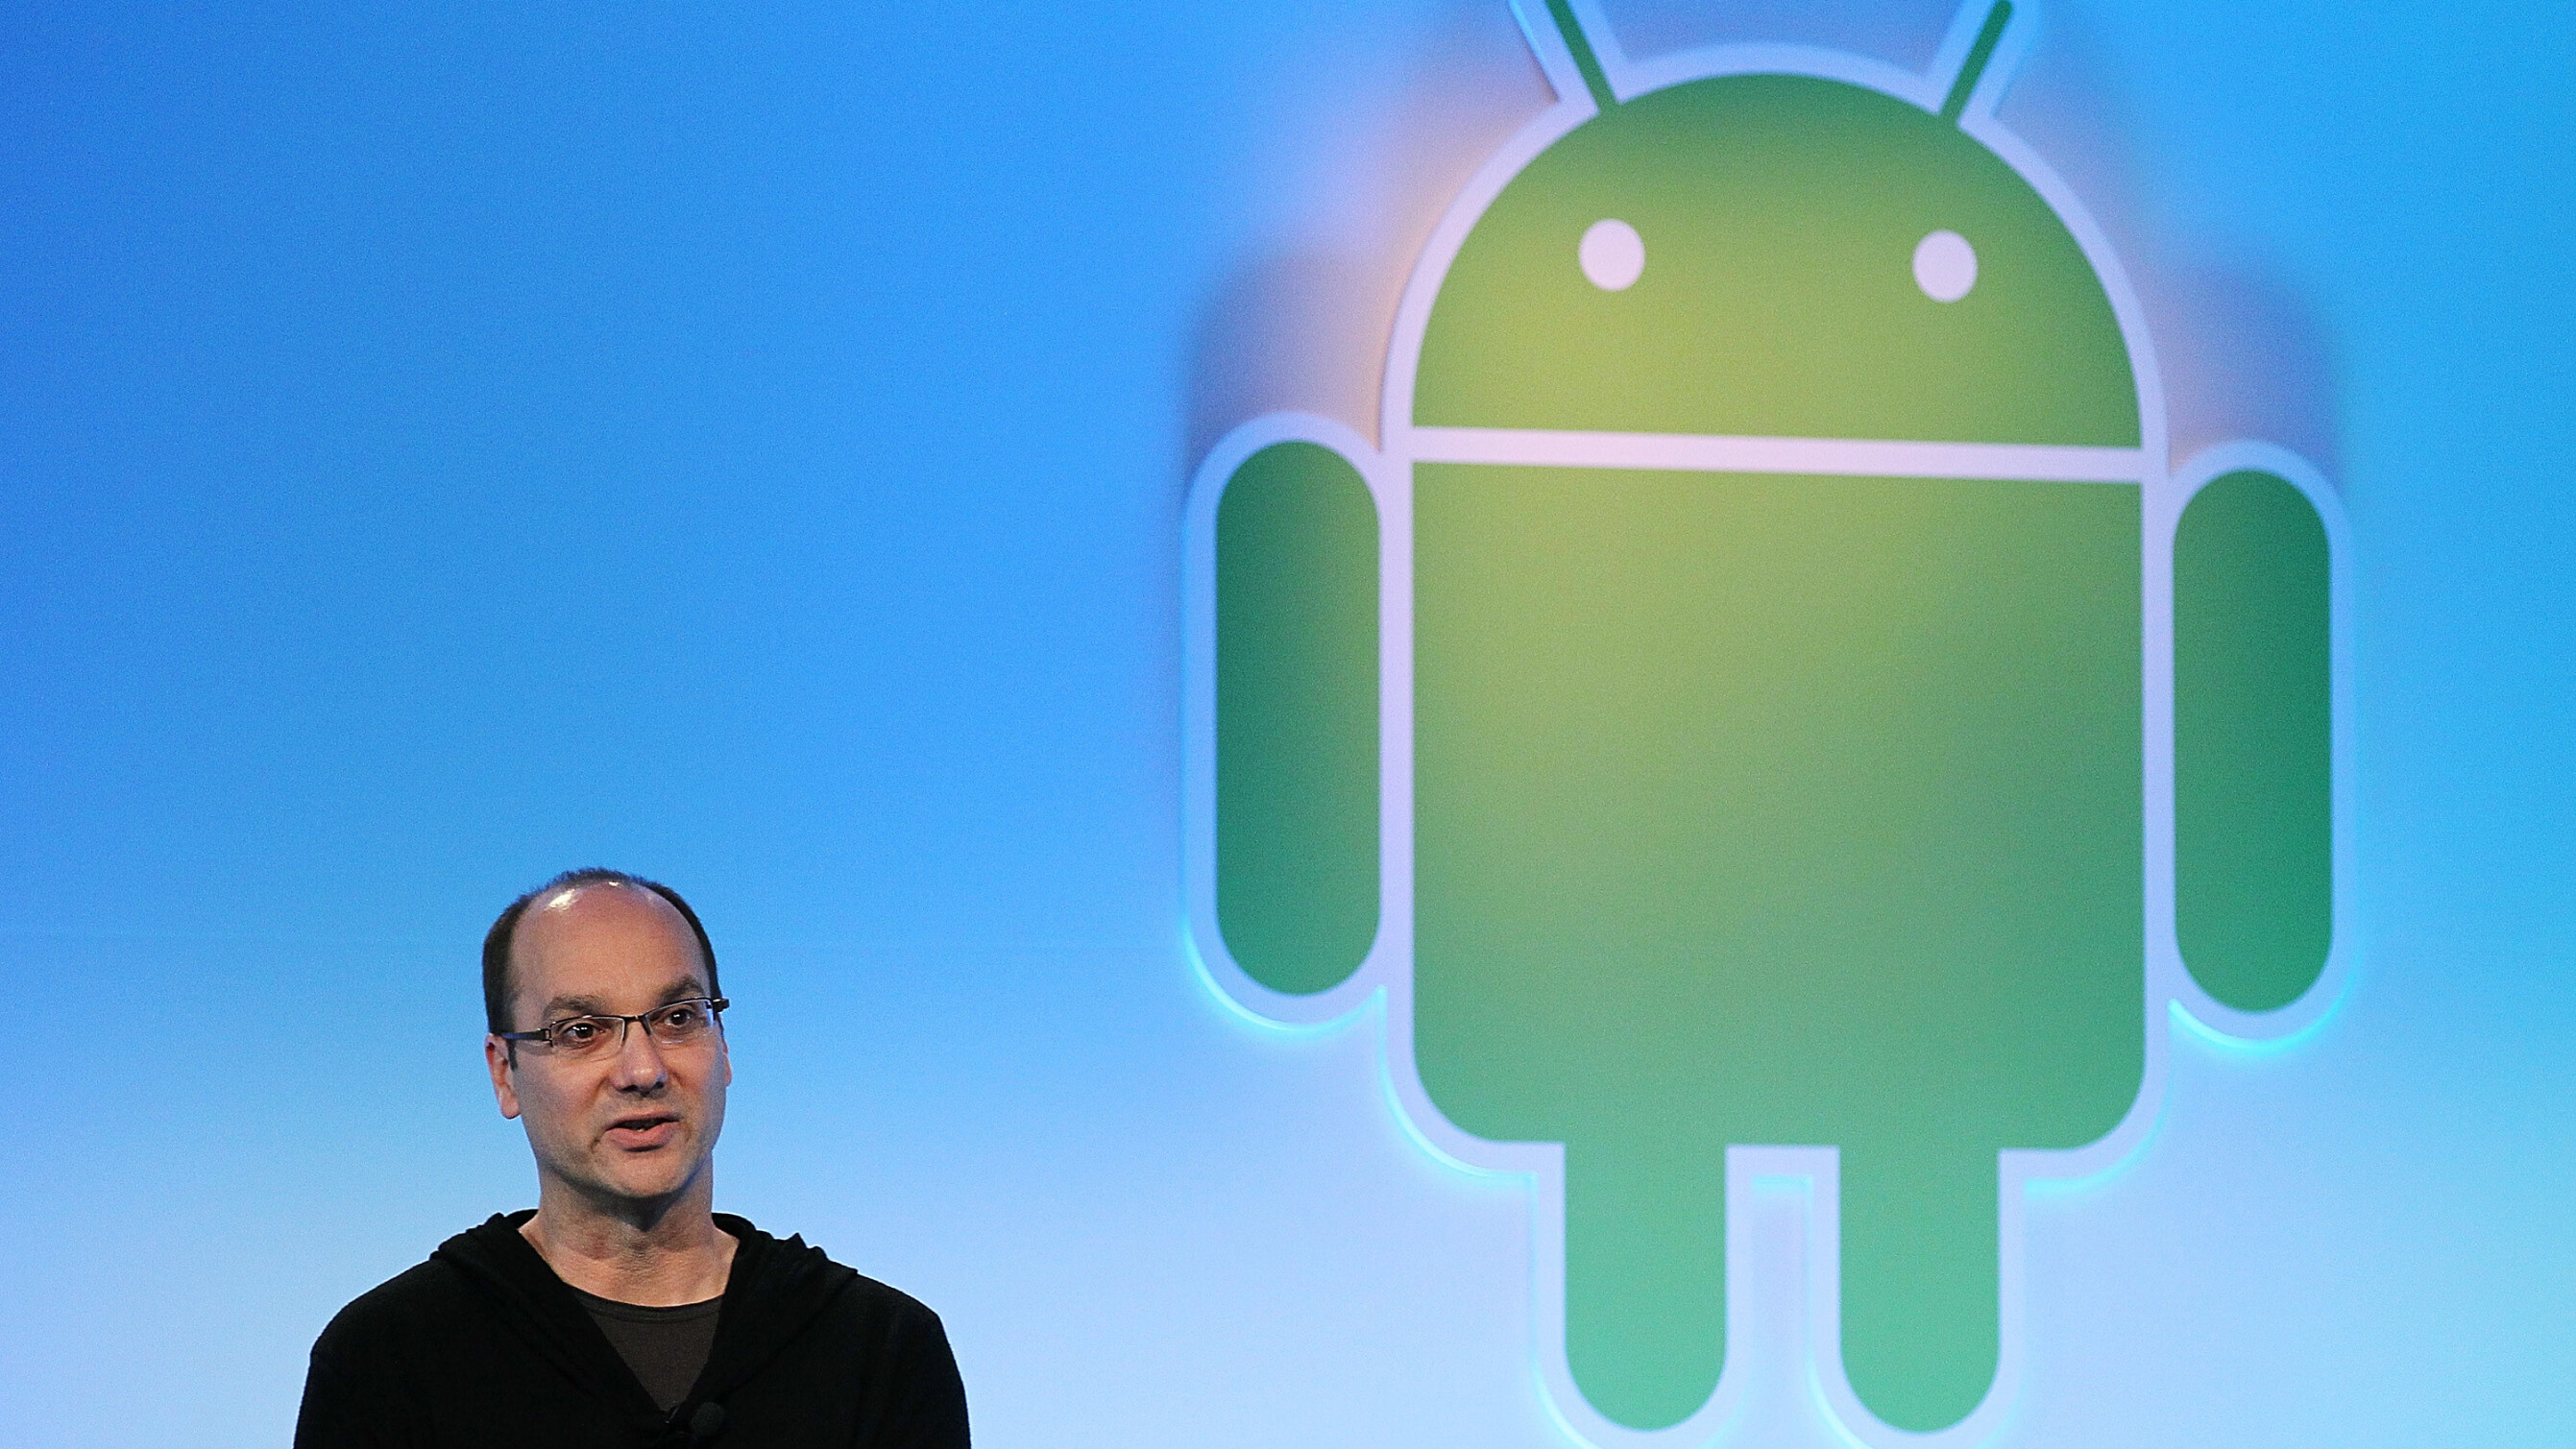 Android founder and leader Andy Rubin steps down as the platform passes 750m device sales